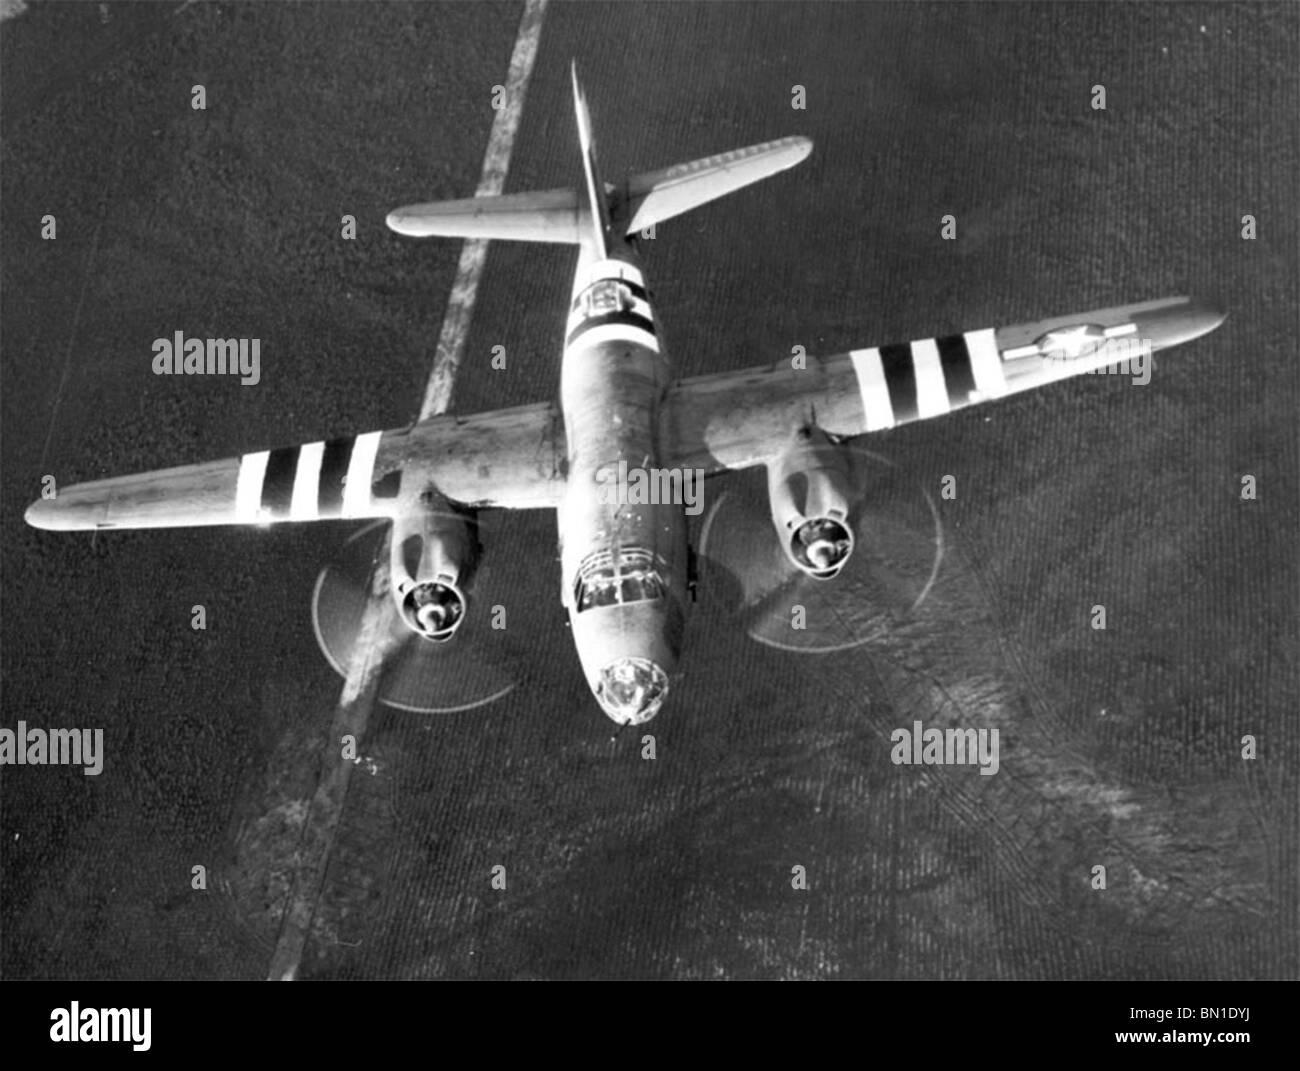 A B-26 Marauder flies with invasion stripes for D-Day. Stock Photo